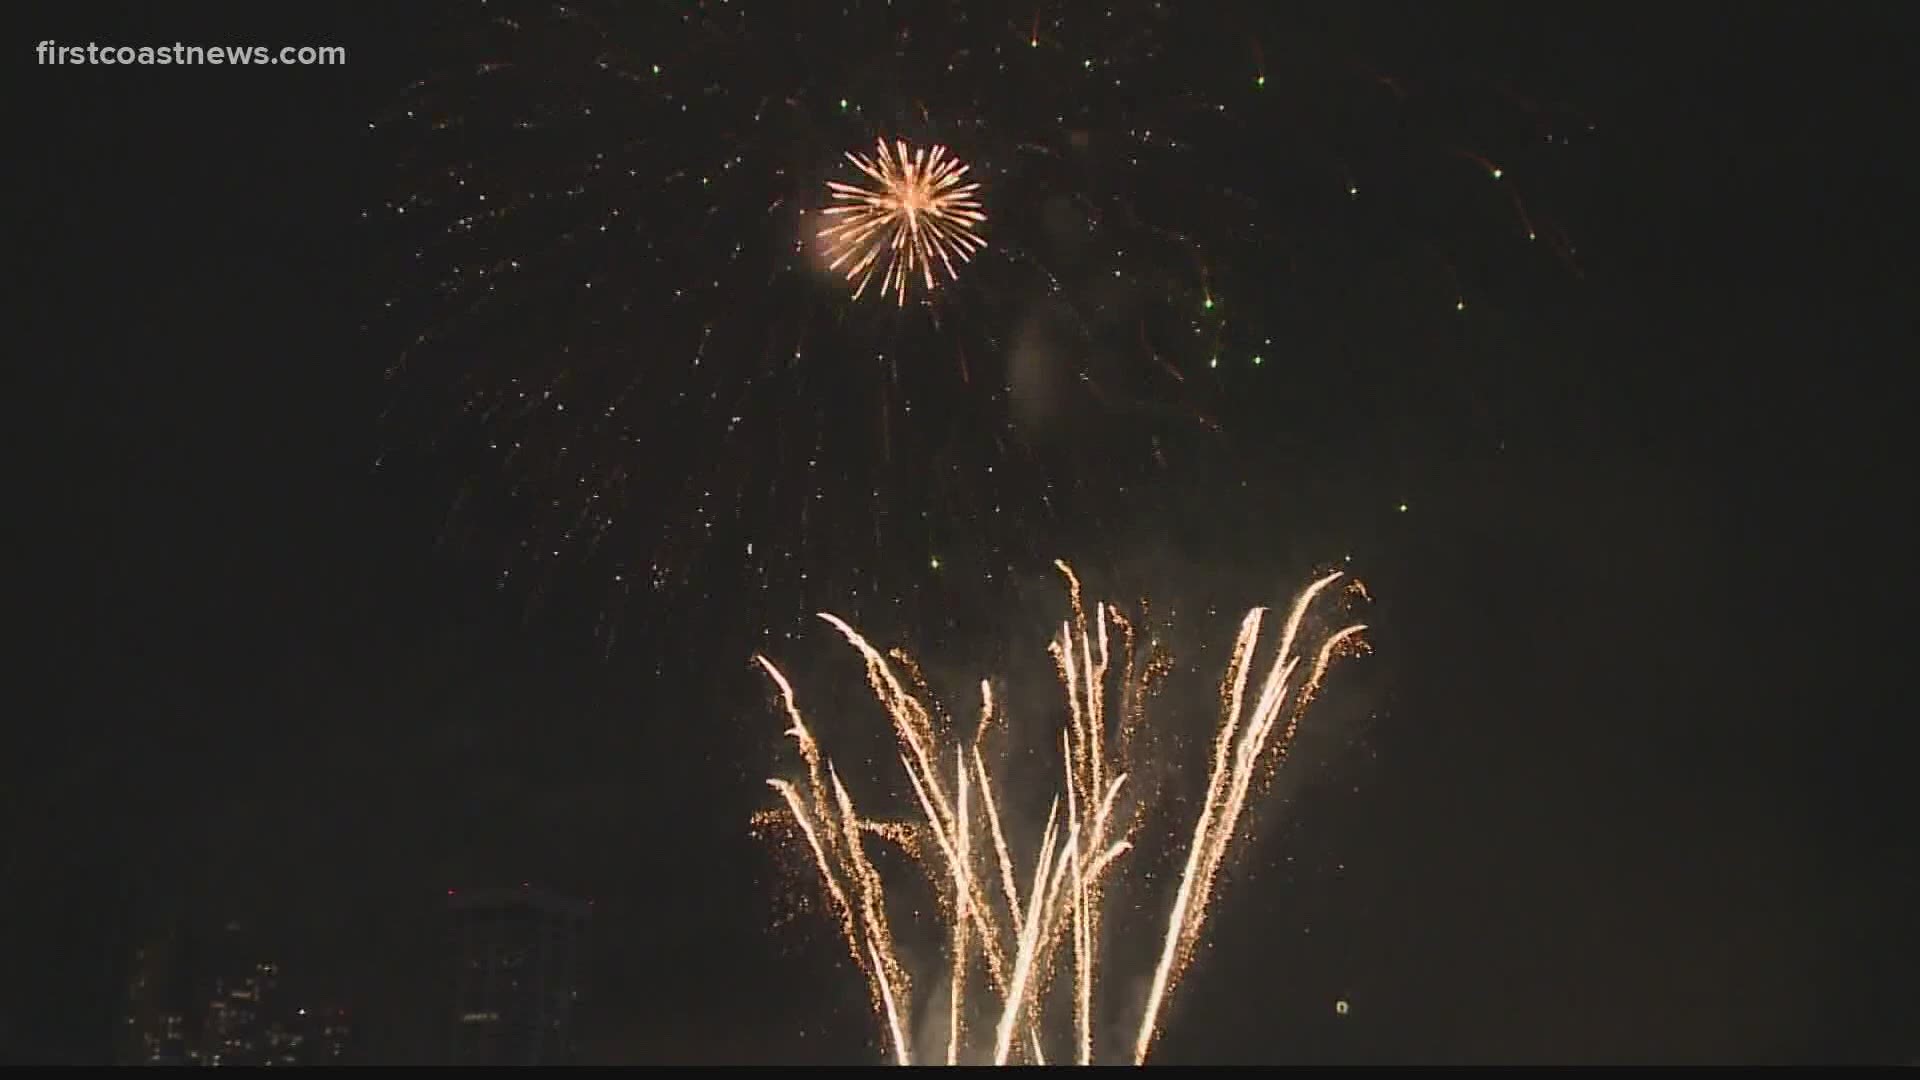 The City Commission decided Monday night to cancel its fireworks celebration for the 4th of July, but city leaders say that choice was based on inaccurate info.